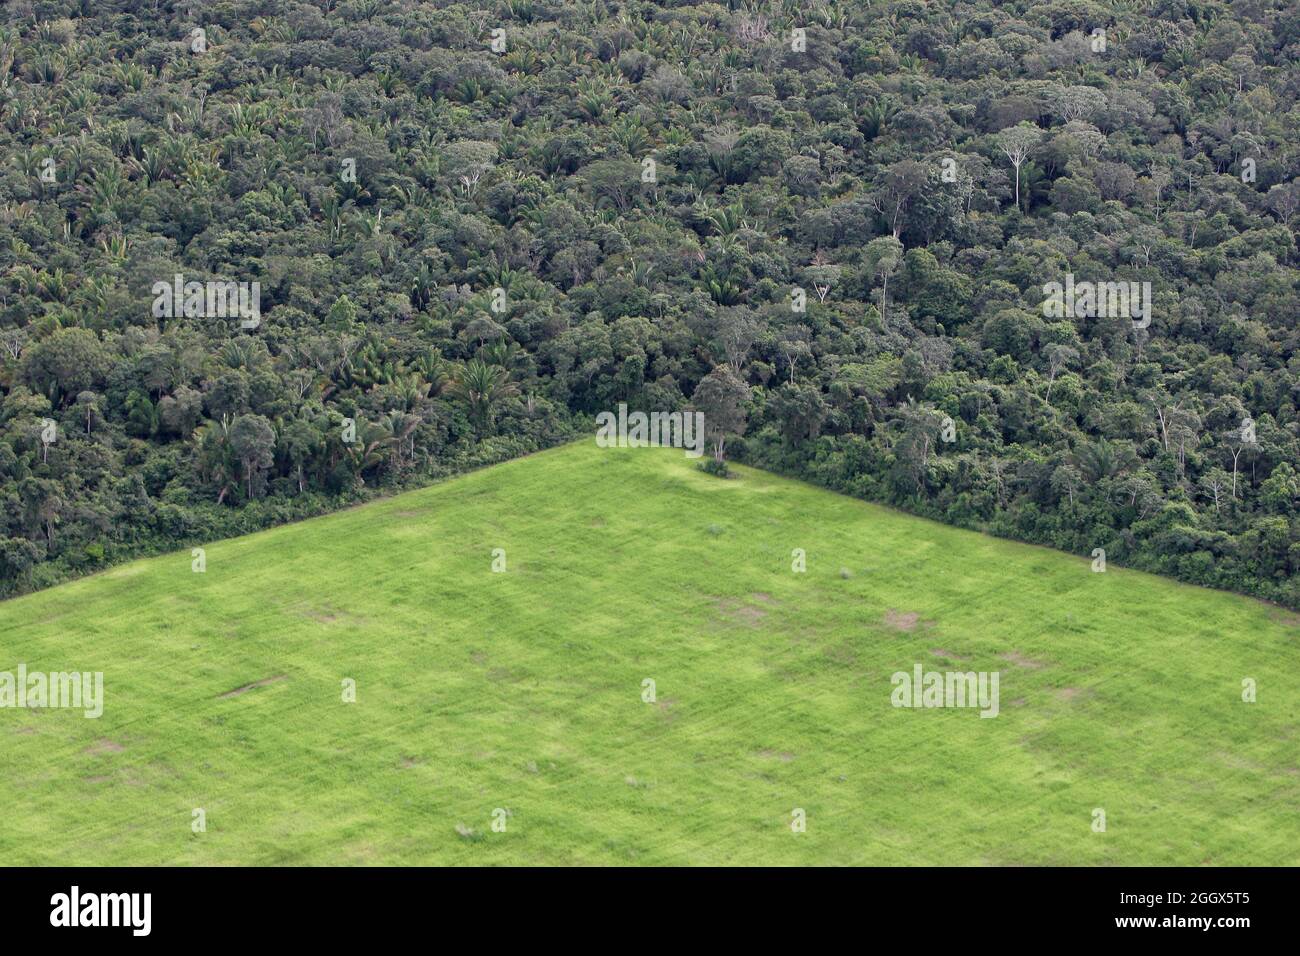 Large estate land management in Amazon rain forest,  interspersed patches of intact forets and deforested areas occupied with soy plantation. Stock Photo